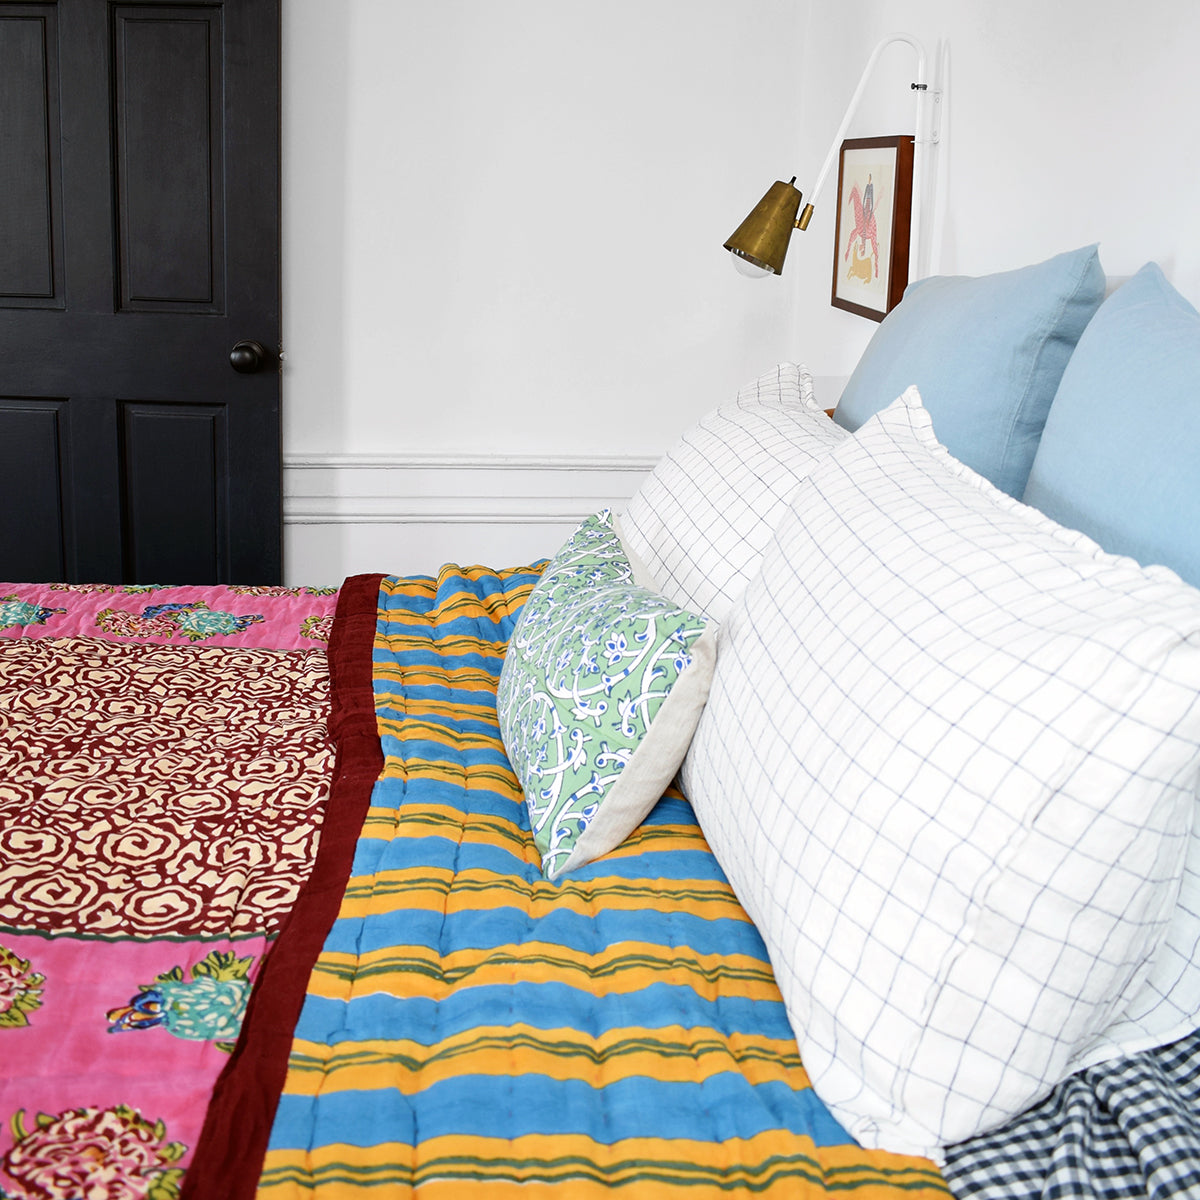 Linge Particulier Navy Check Standard Linen Pillowcase Sham with a Lisa Corti quilt and blue euro shams for a colorful linen bedding look in blue check - Collyer&#39;s Mansion